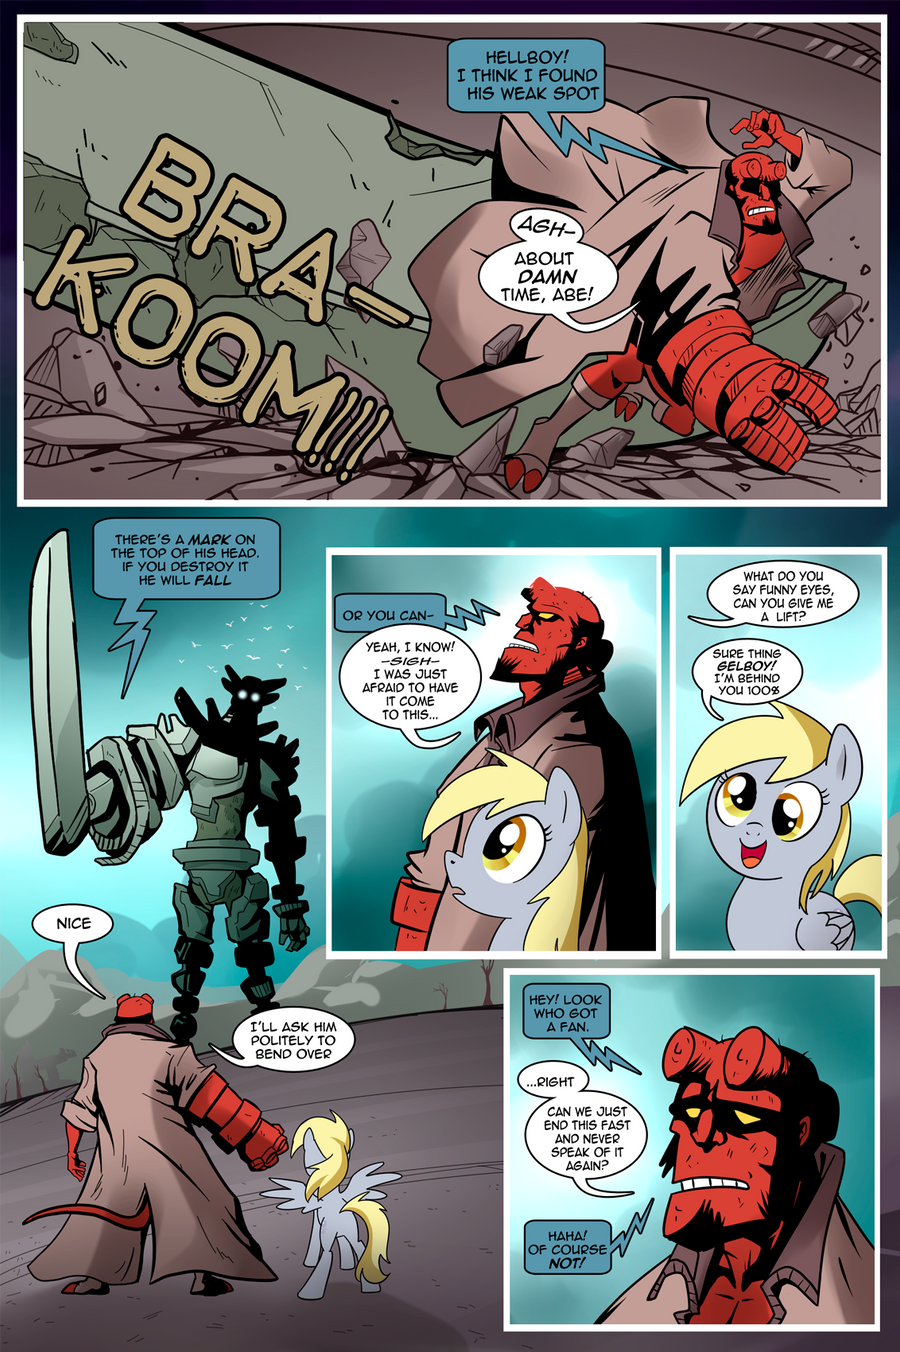 [Image: team_up_derpy_hellboy_02_by_csimadmax-d58caiy.png]